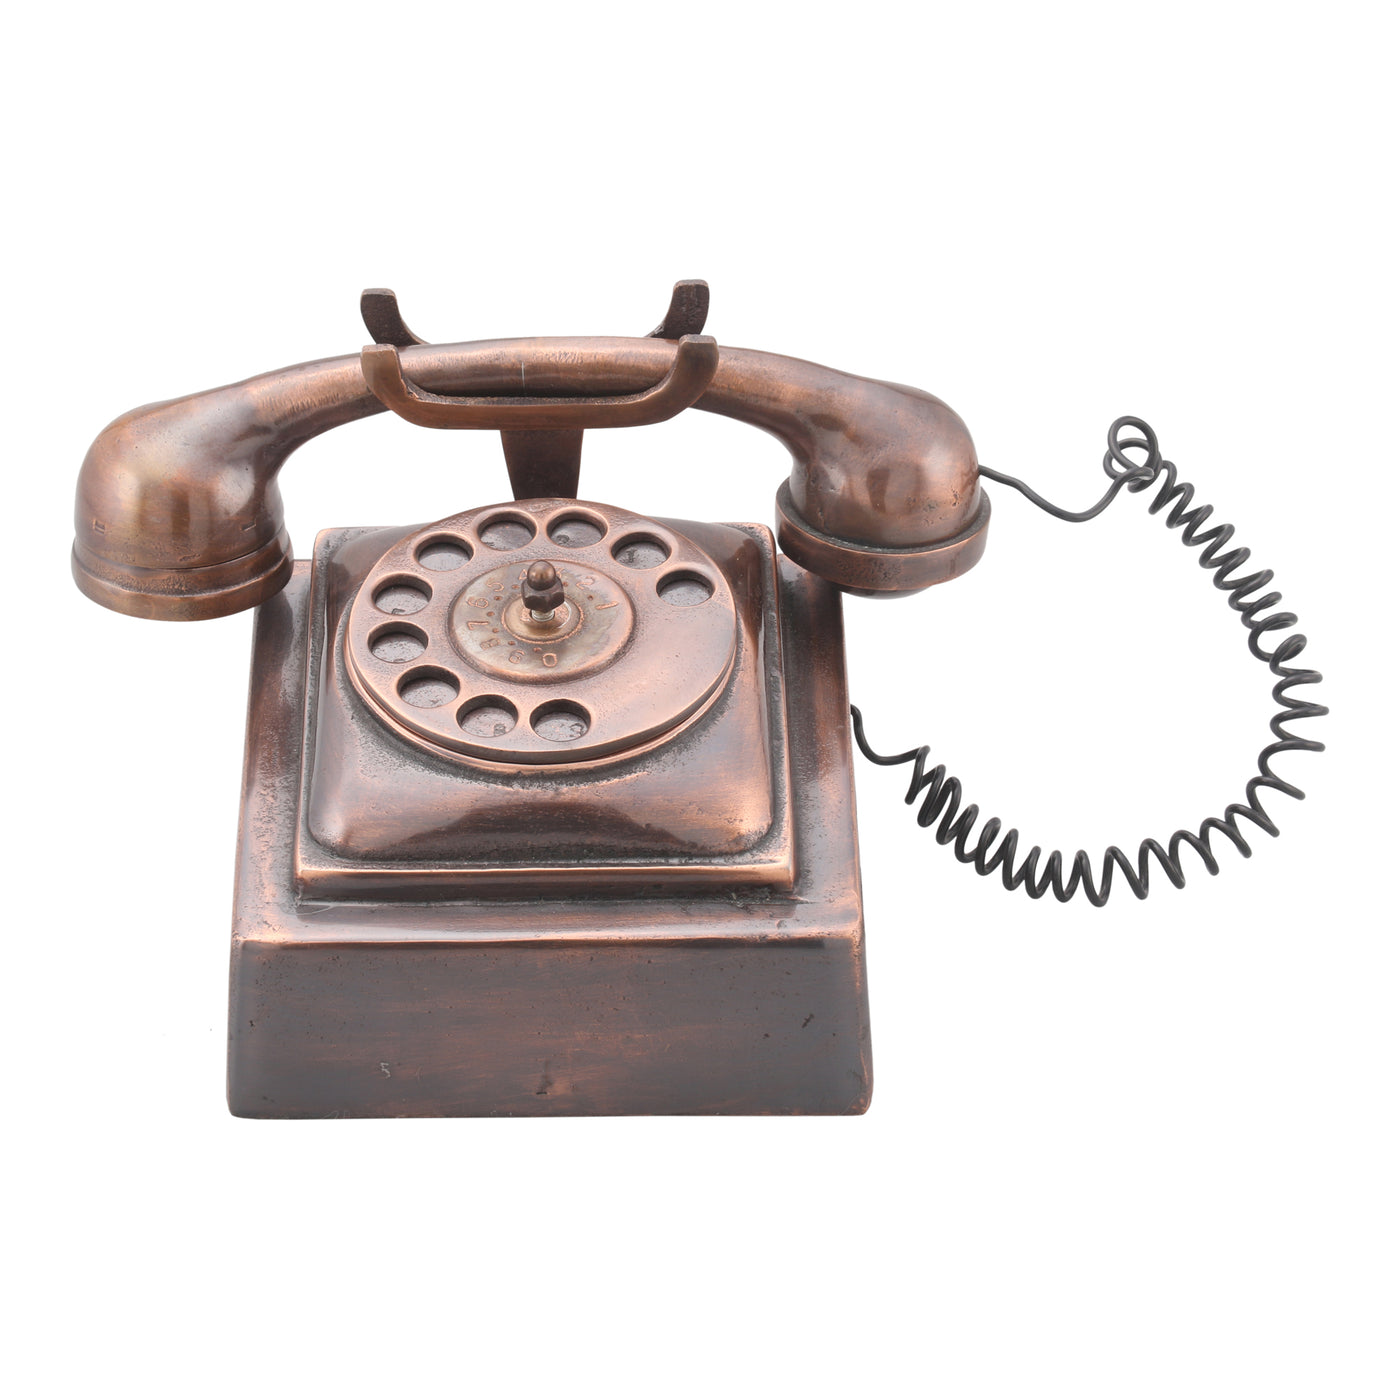 An early model rotary phone, cast in aluminum and given an antique-bronze finish. perfect retro piece to add in your space...